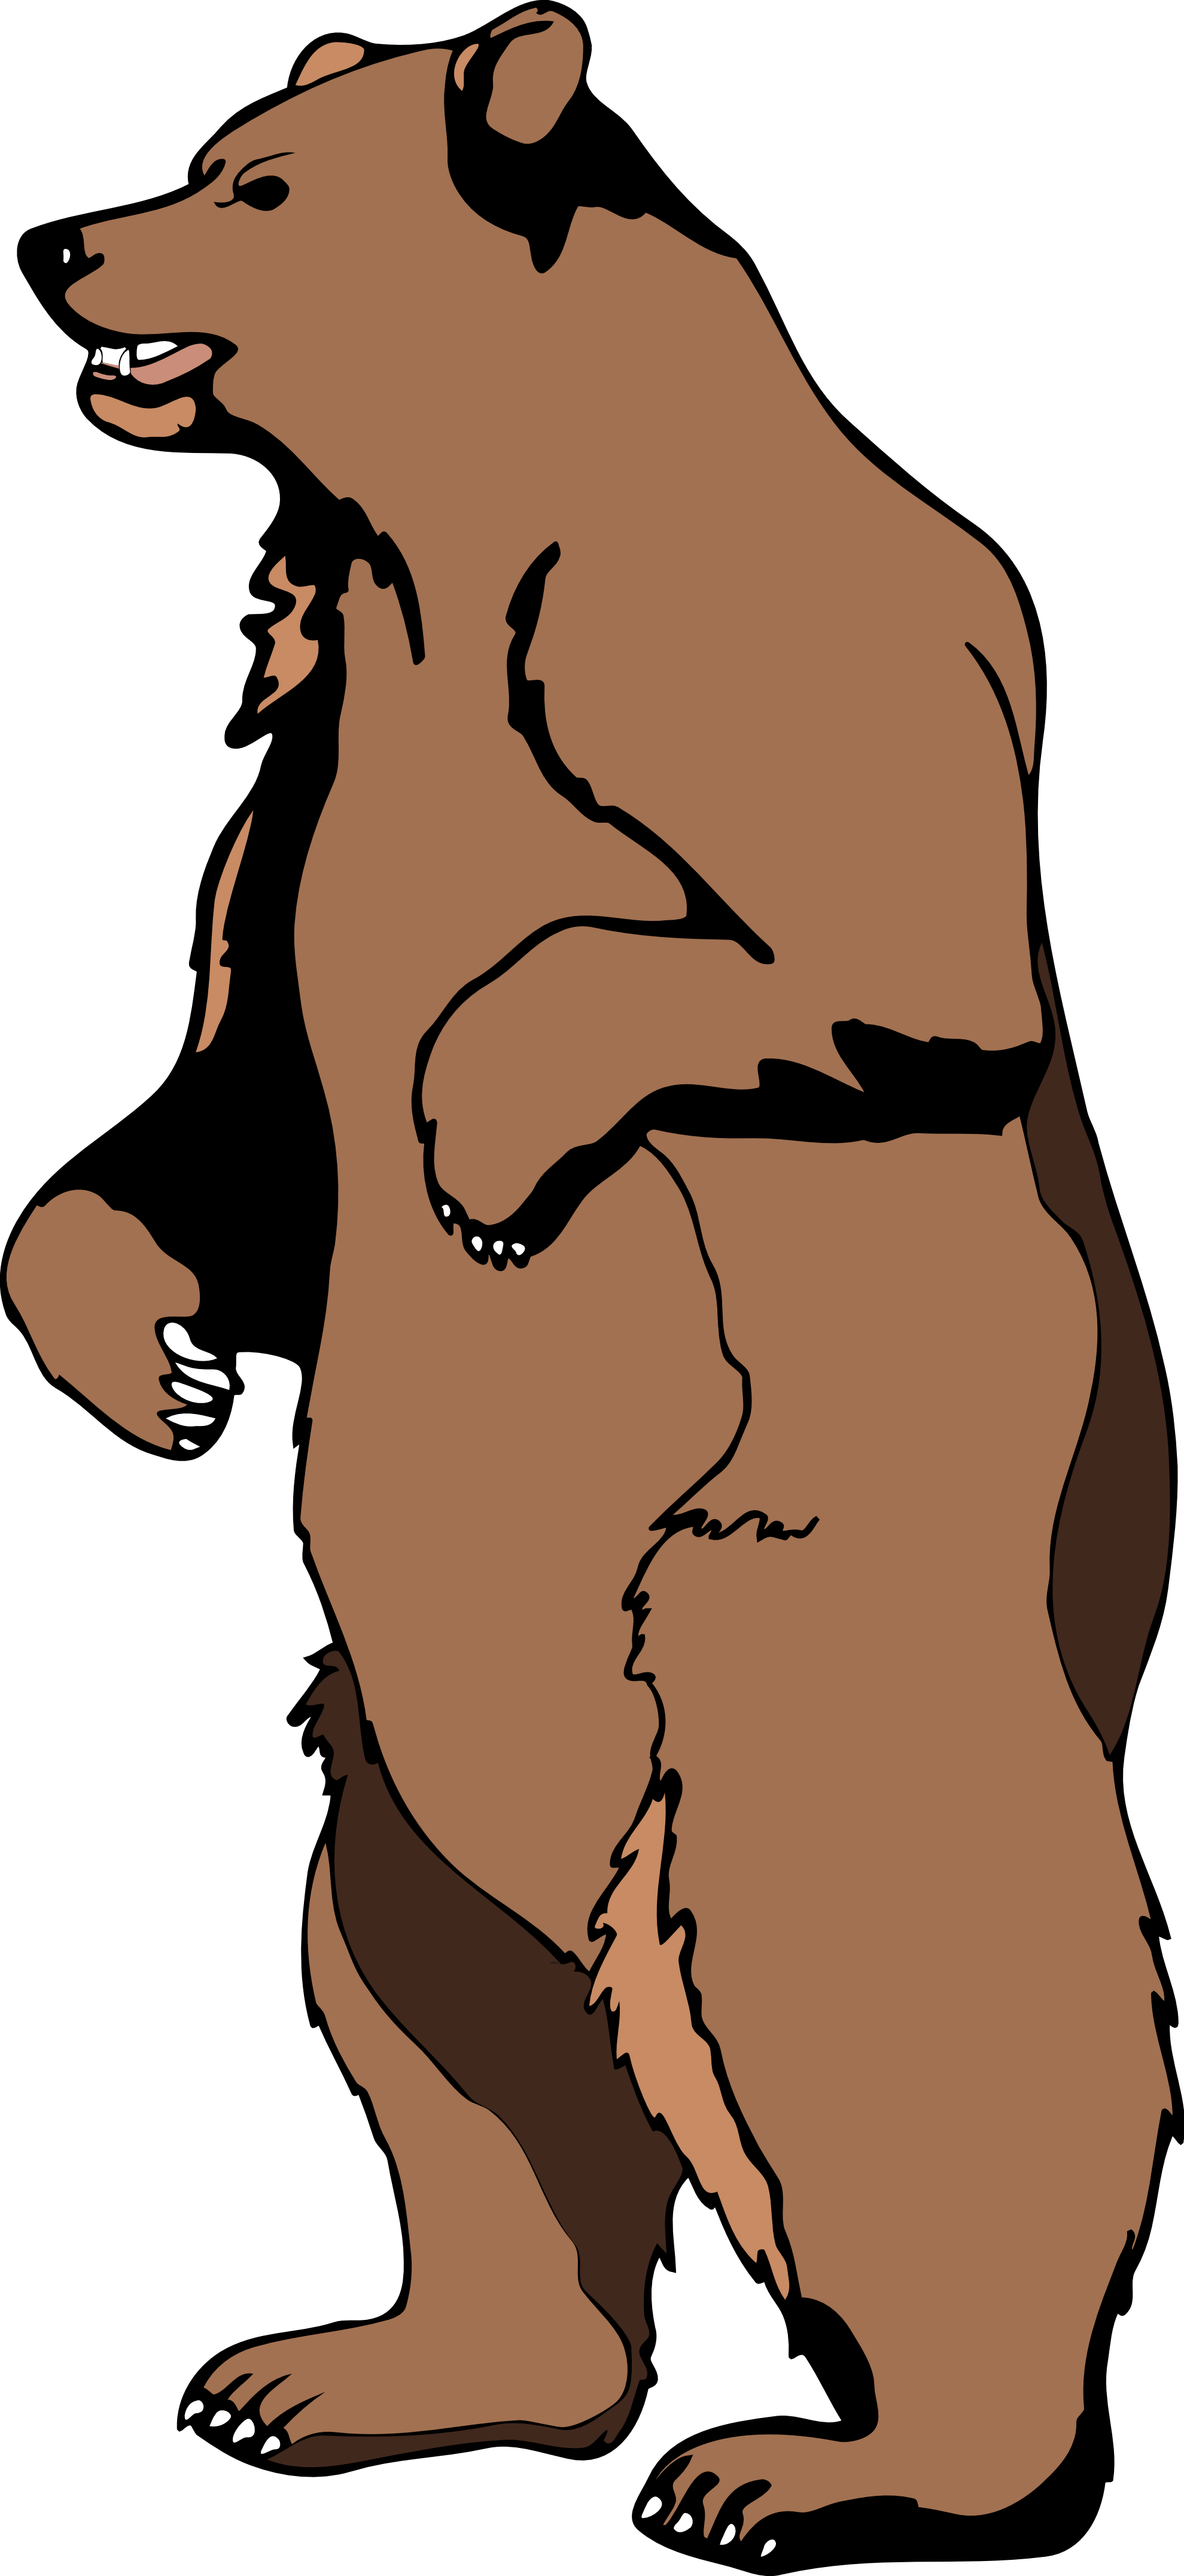 Standing Bear Images Hd Image Clipart